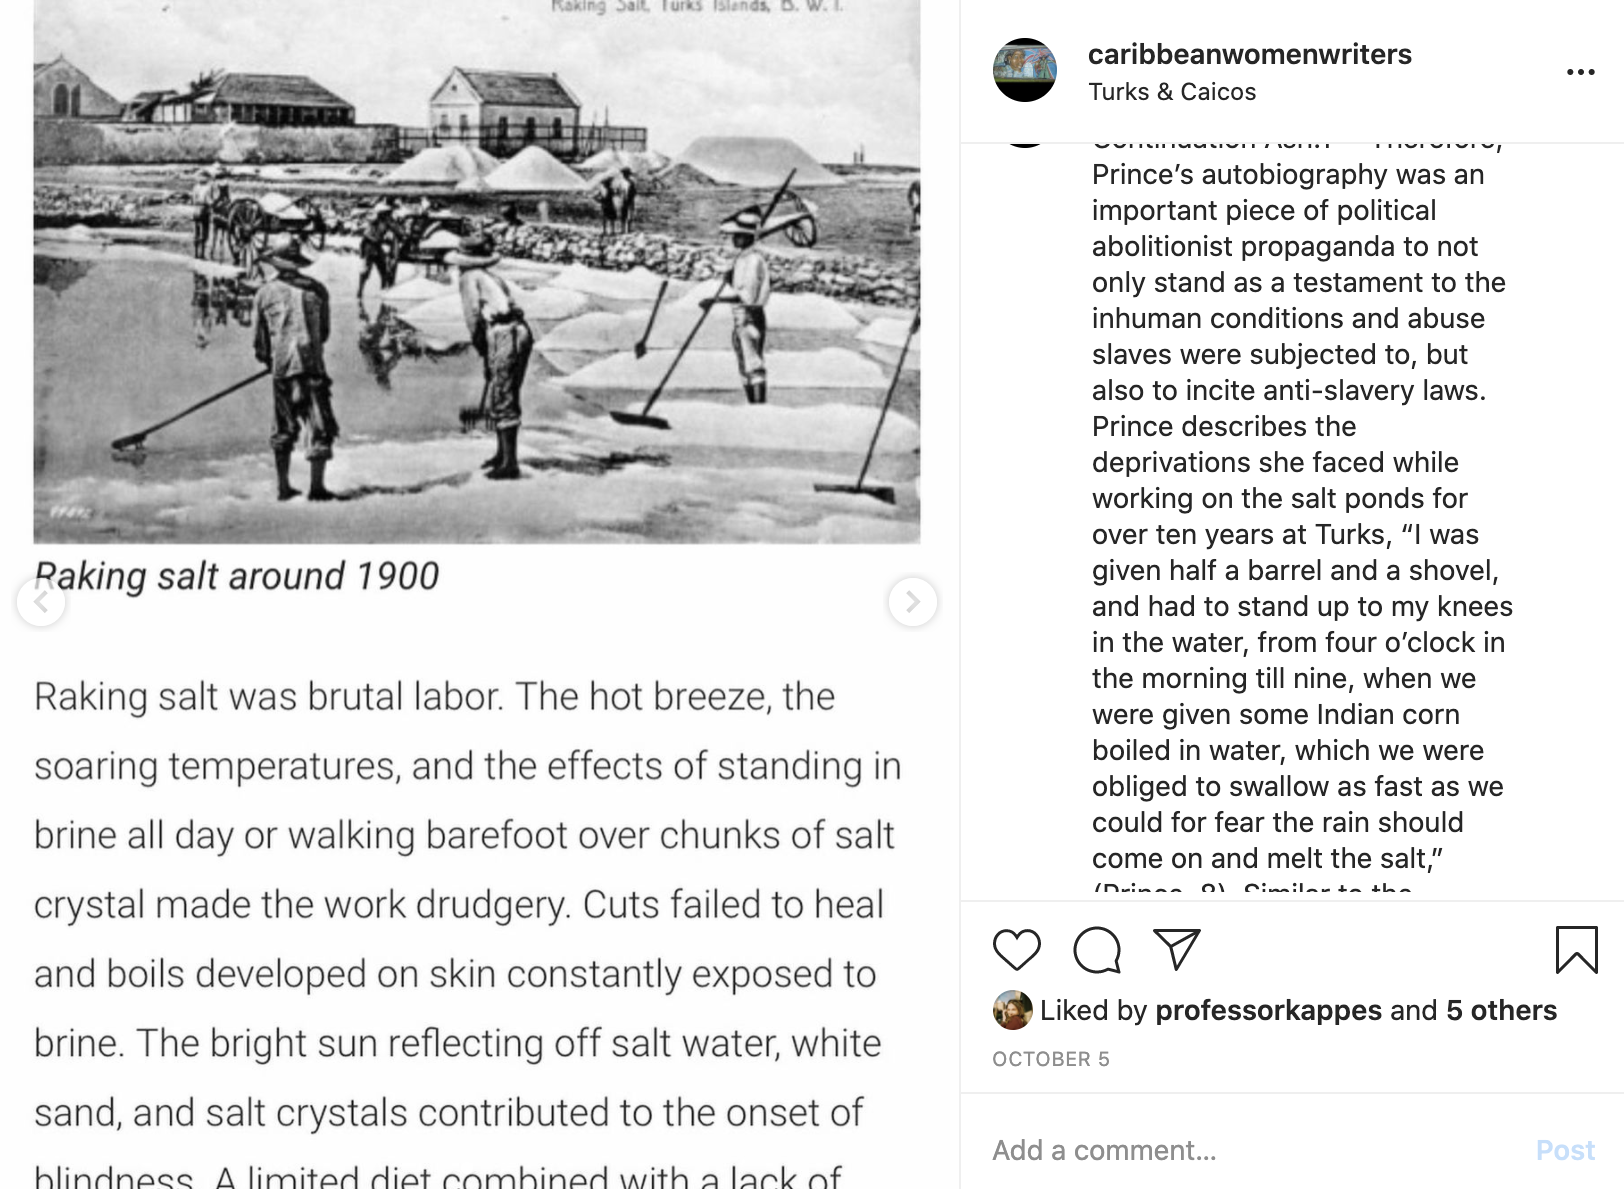 Fig. 1. Screenshot of student Instagram post “Raking salt around 1900.” On the left is an image of people raking salt around 1900. On the right is the account name (@caribbeanwomenwriters), location tag (“Turks & Caicos”), and part of the caption. Underneath the caption is text that signifies that the post has been “Liked by professorkappes and 5 others.”